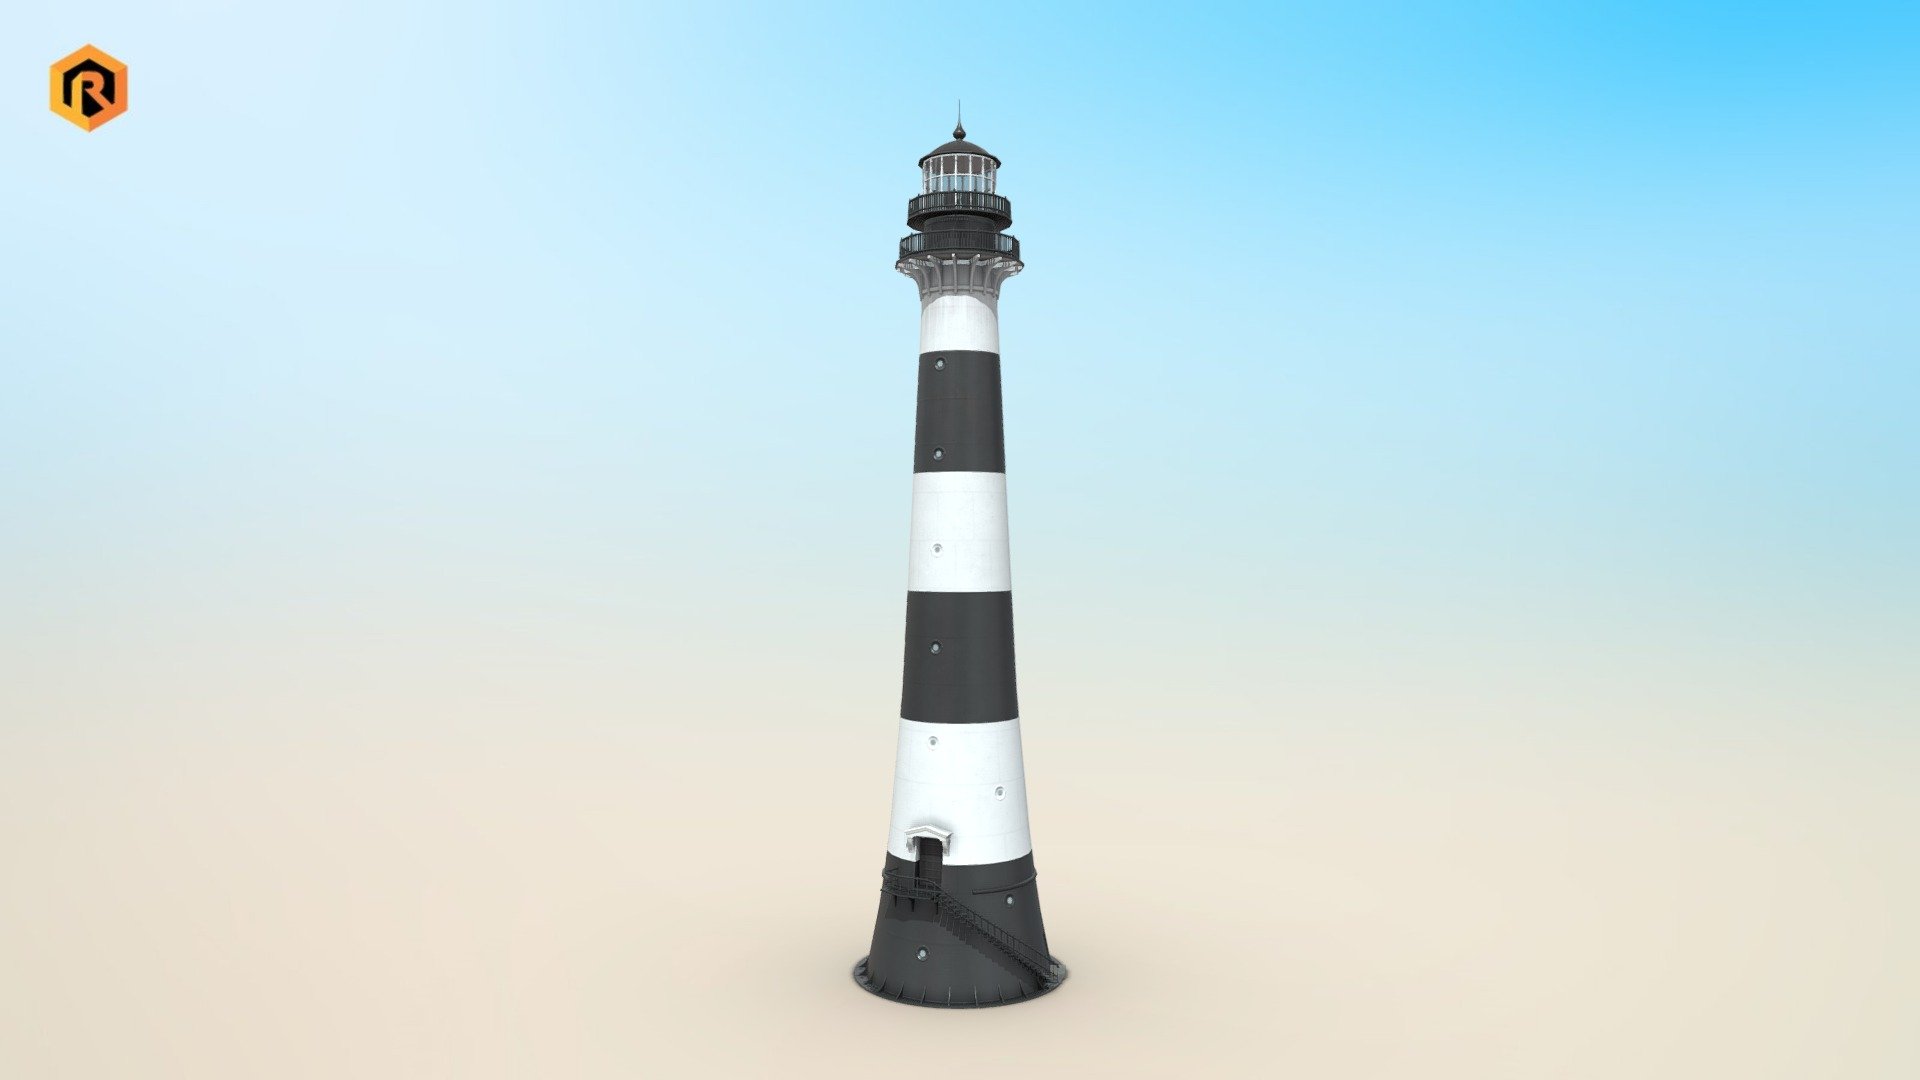 Low-poly PBR 3D model of Cape Canaveral Lighthouse.
It is best for use in games and other VR / AR, real-time applications such as Unity or Unreal Engine.  It can also be rendered in Blender (ex Cycles) or Vray as the model is equipped with detailed textures.  

Technical details:




3 PBR textures sets (Main Body, Glass and Additional Alpha)  

5029 Triangles  

5991 Vertices

Model is one mesh

Model completely unwrapped 

Model is fully textured with all materials applied 

Lot of additional file formats included (Blender, Unity, Maya etc.)  

More file formats are available in additional zip file on product page.

Please feel free to contact me if you have any questions or need any support for this asset.

Support e-mail: support@rescue3d.com - Cape Canaveral Lighthouse - Buy Royalty Free 3D model by Rescue3D Assets (@rescue3d) 3d model